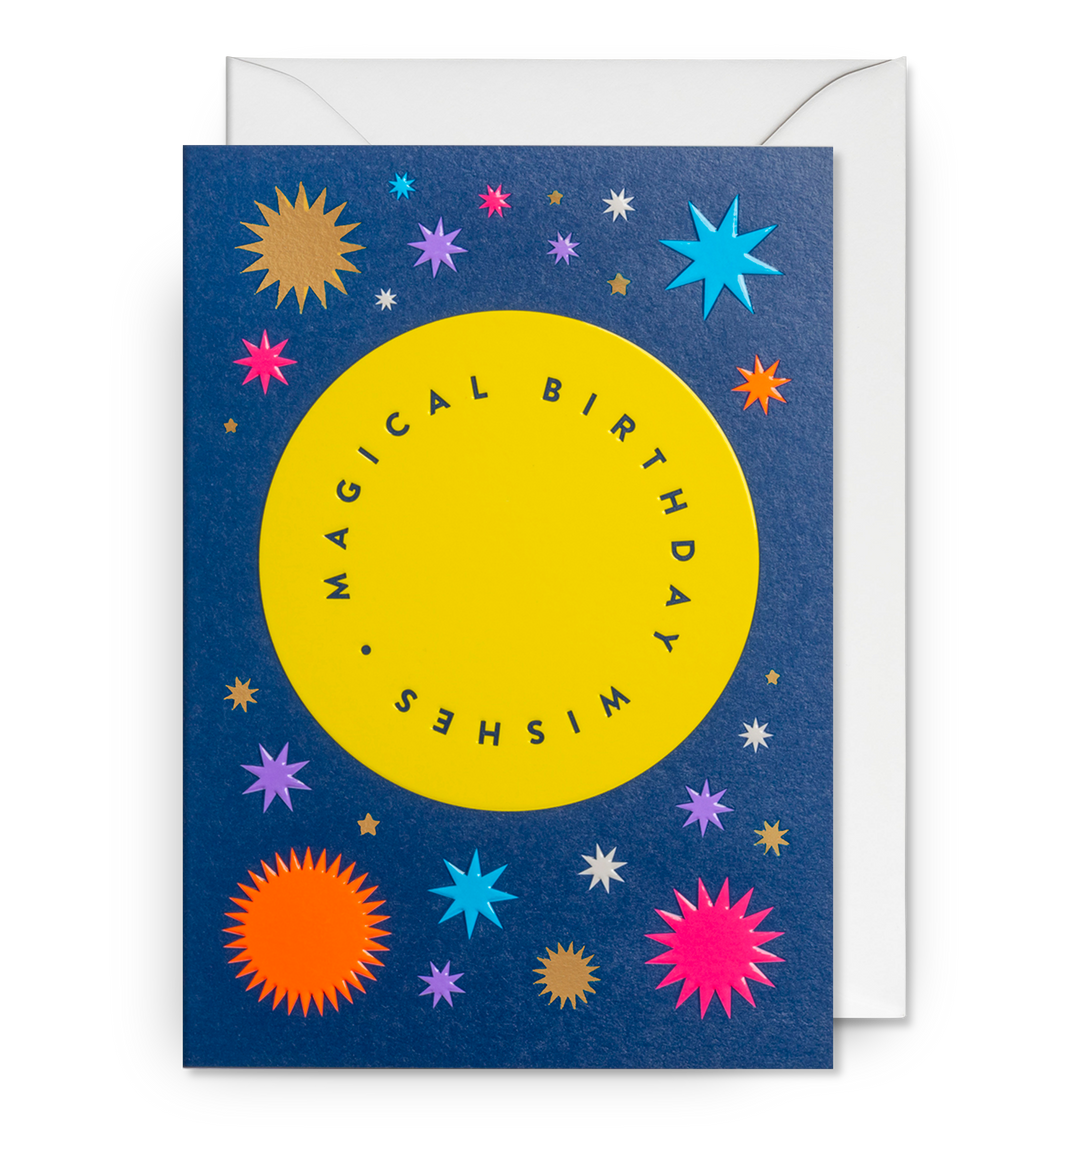 Magical Birthday Wishes Card